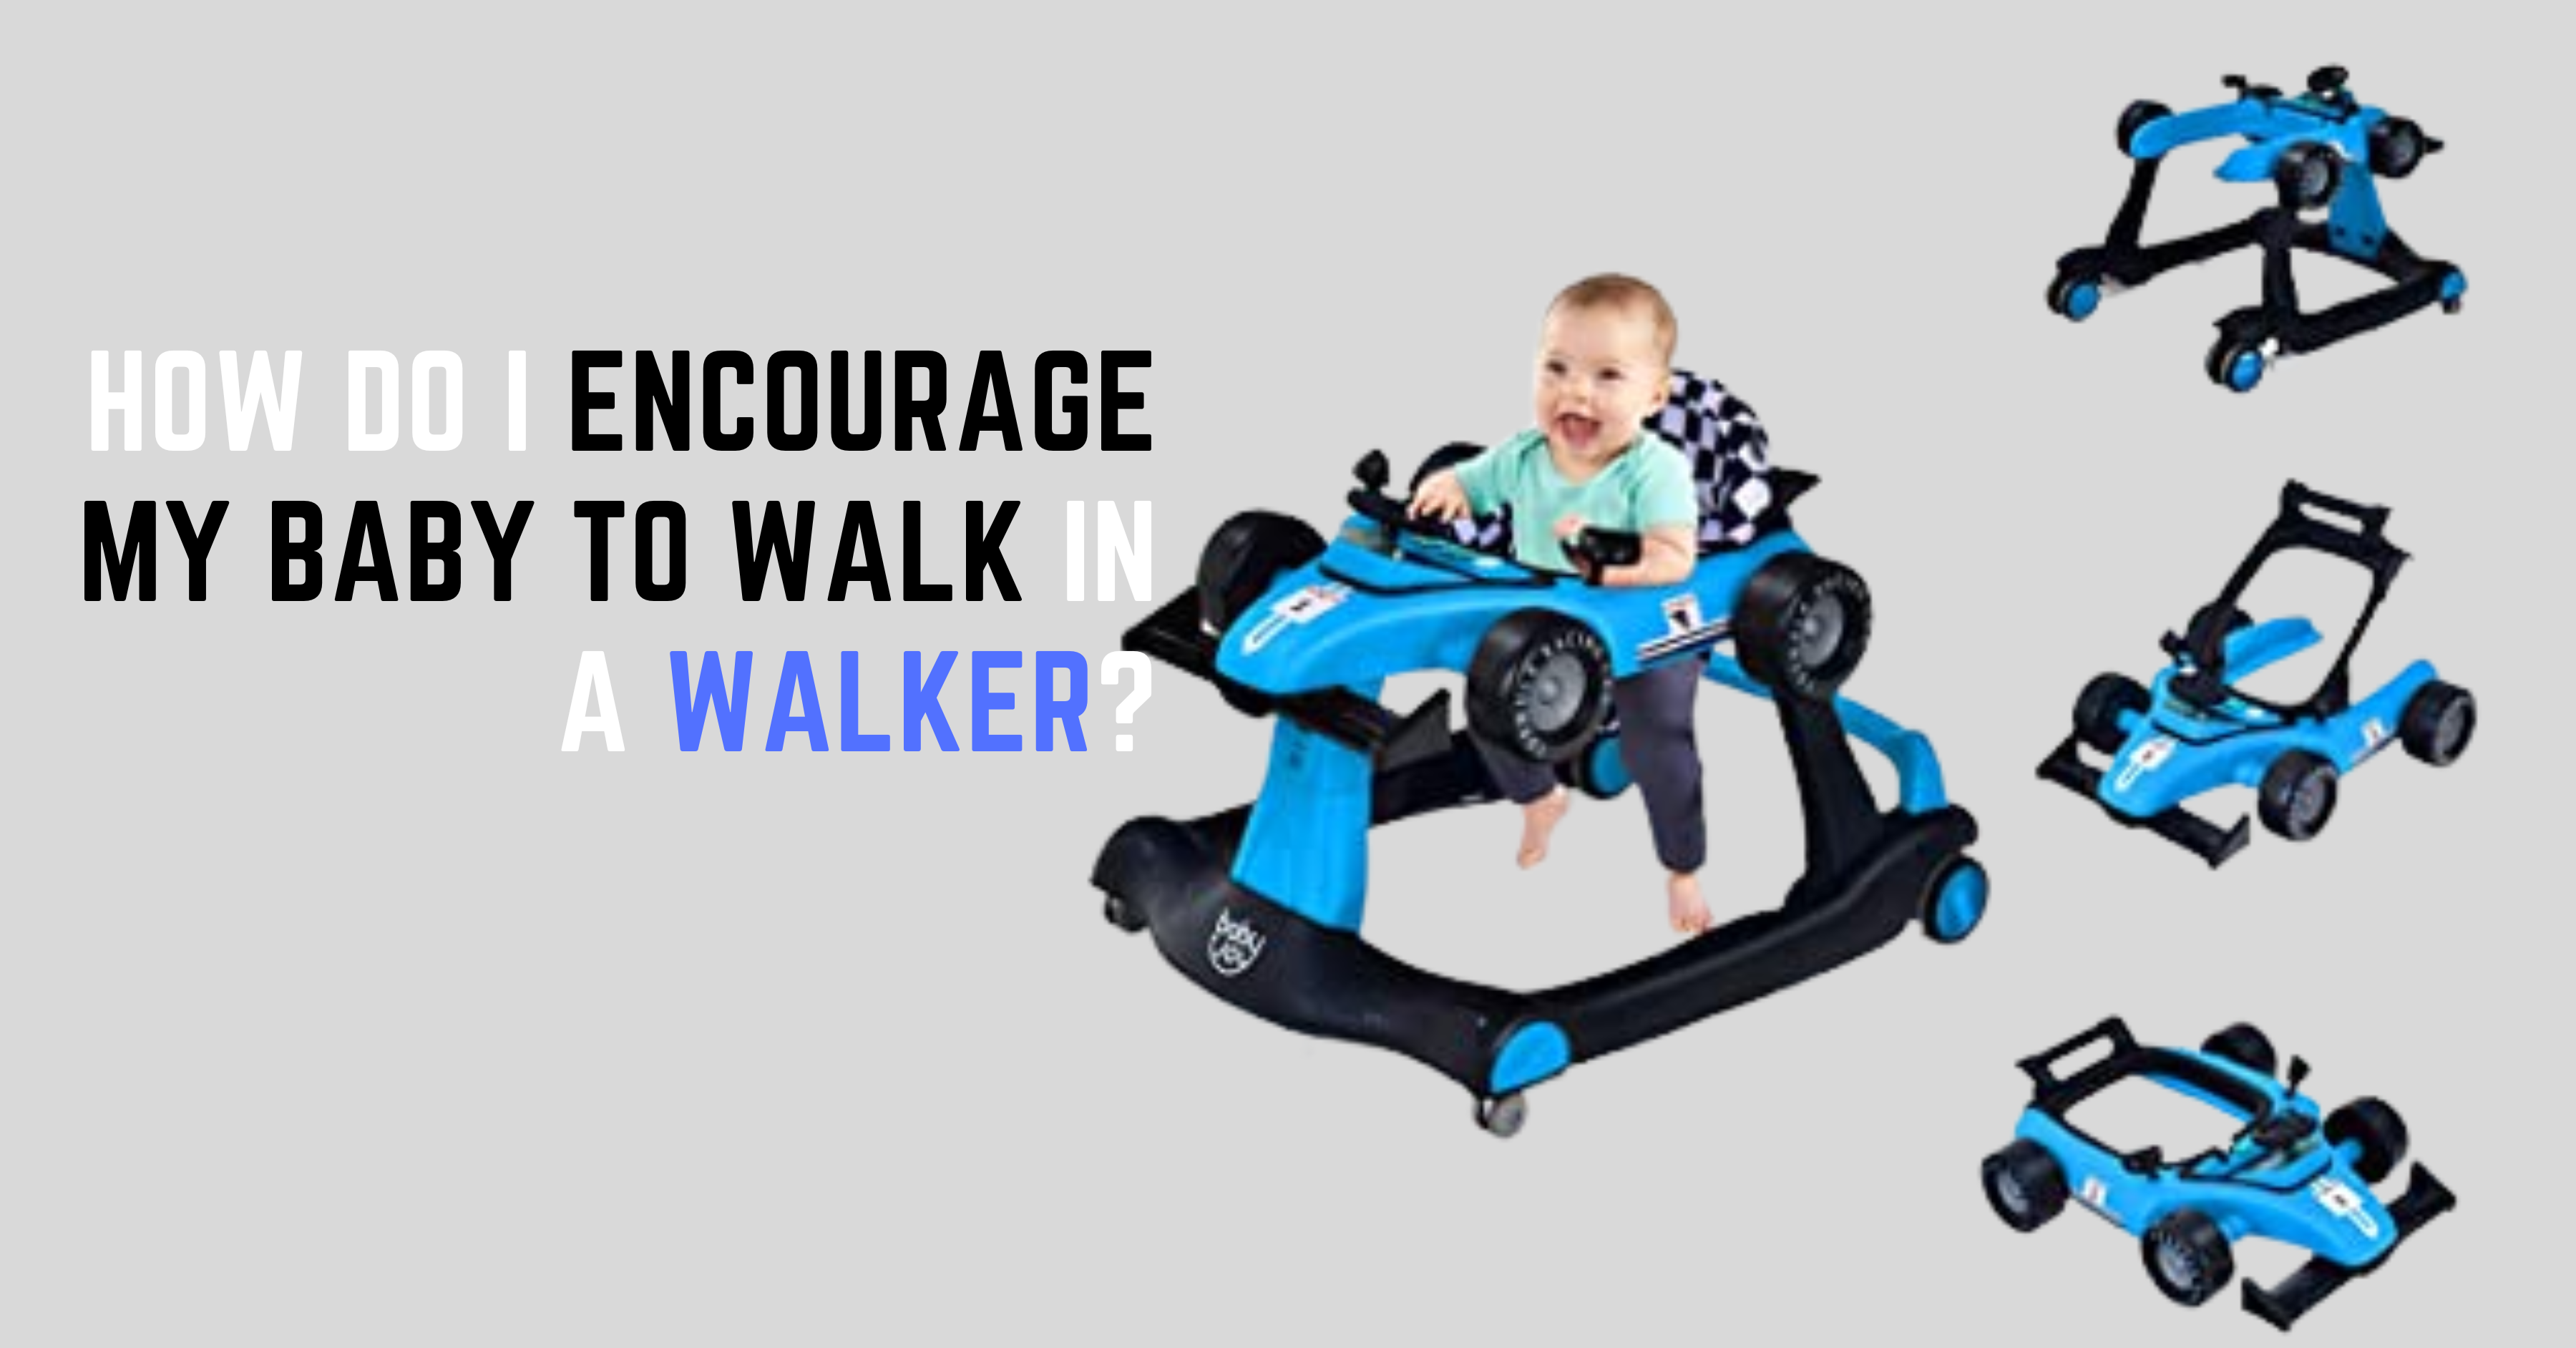 How Do I Encourage My Baby to Walk in a Walker